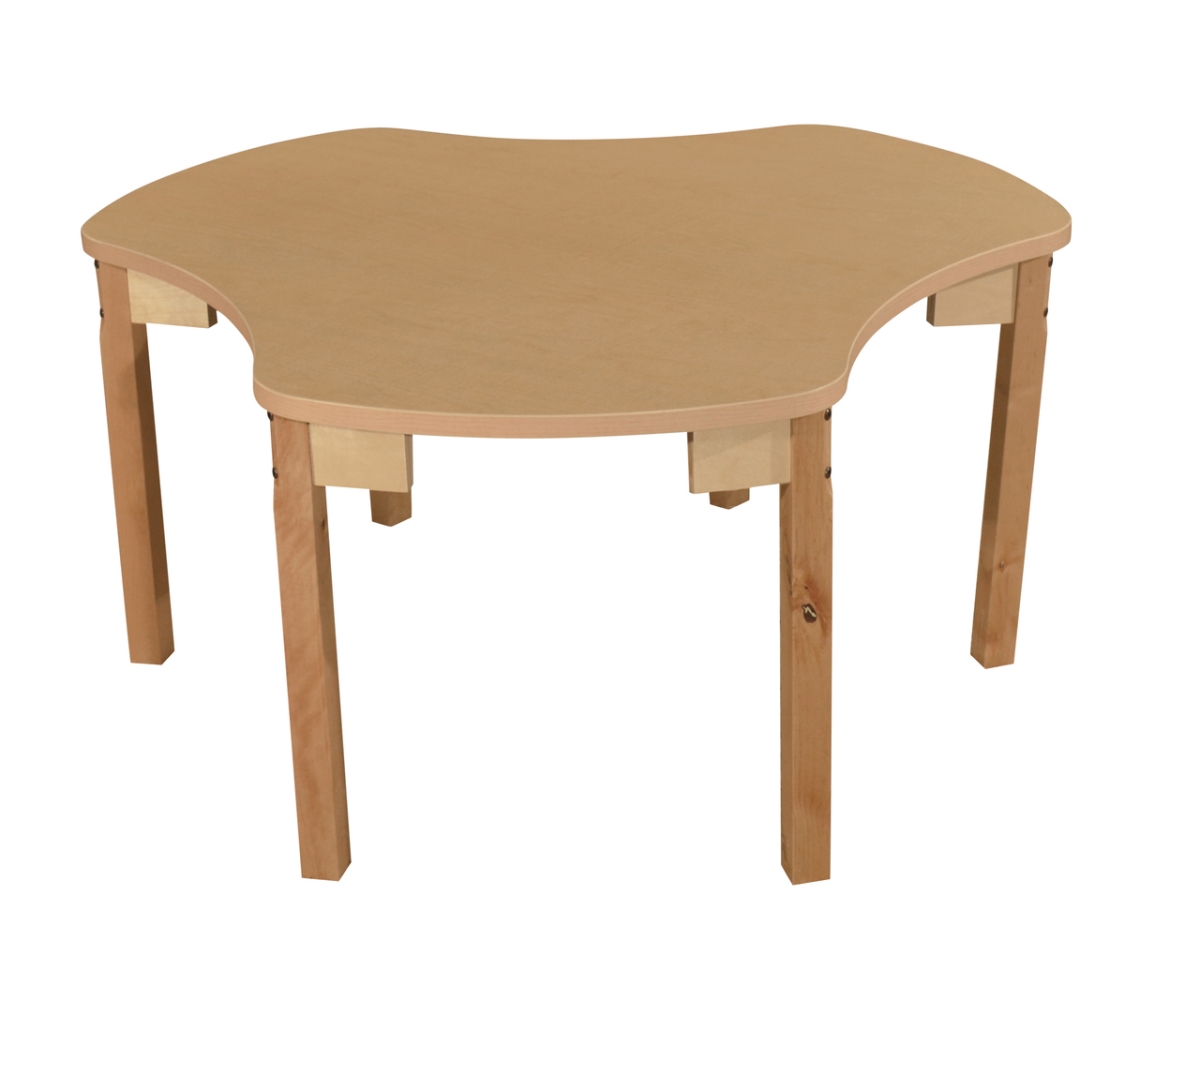 Picture of Wood Designs HPL4448C20 44 x 48 in. Synergy Union High Pressure Laminate Group Table with Hardwood Legs- 20 in.